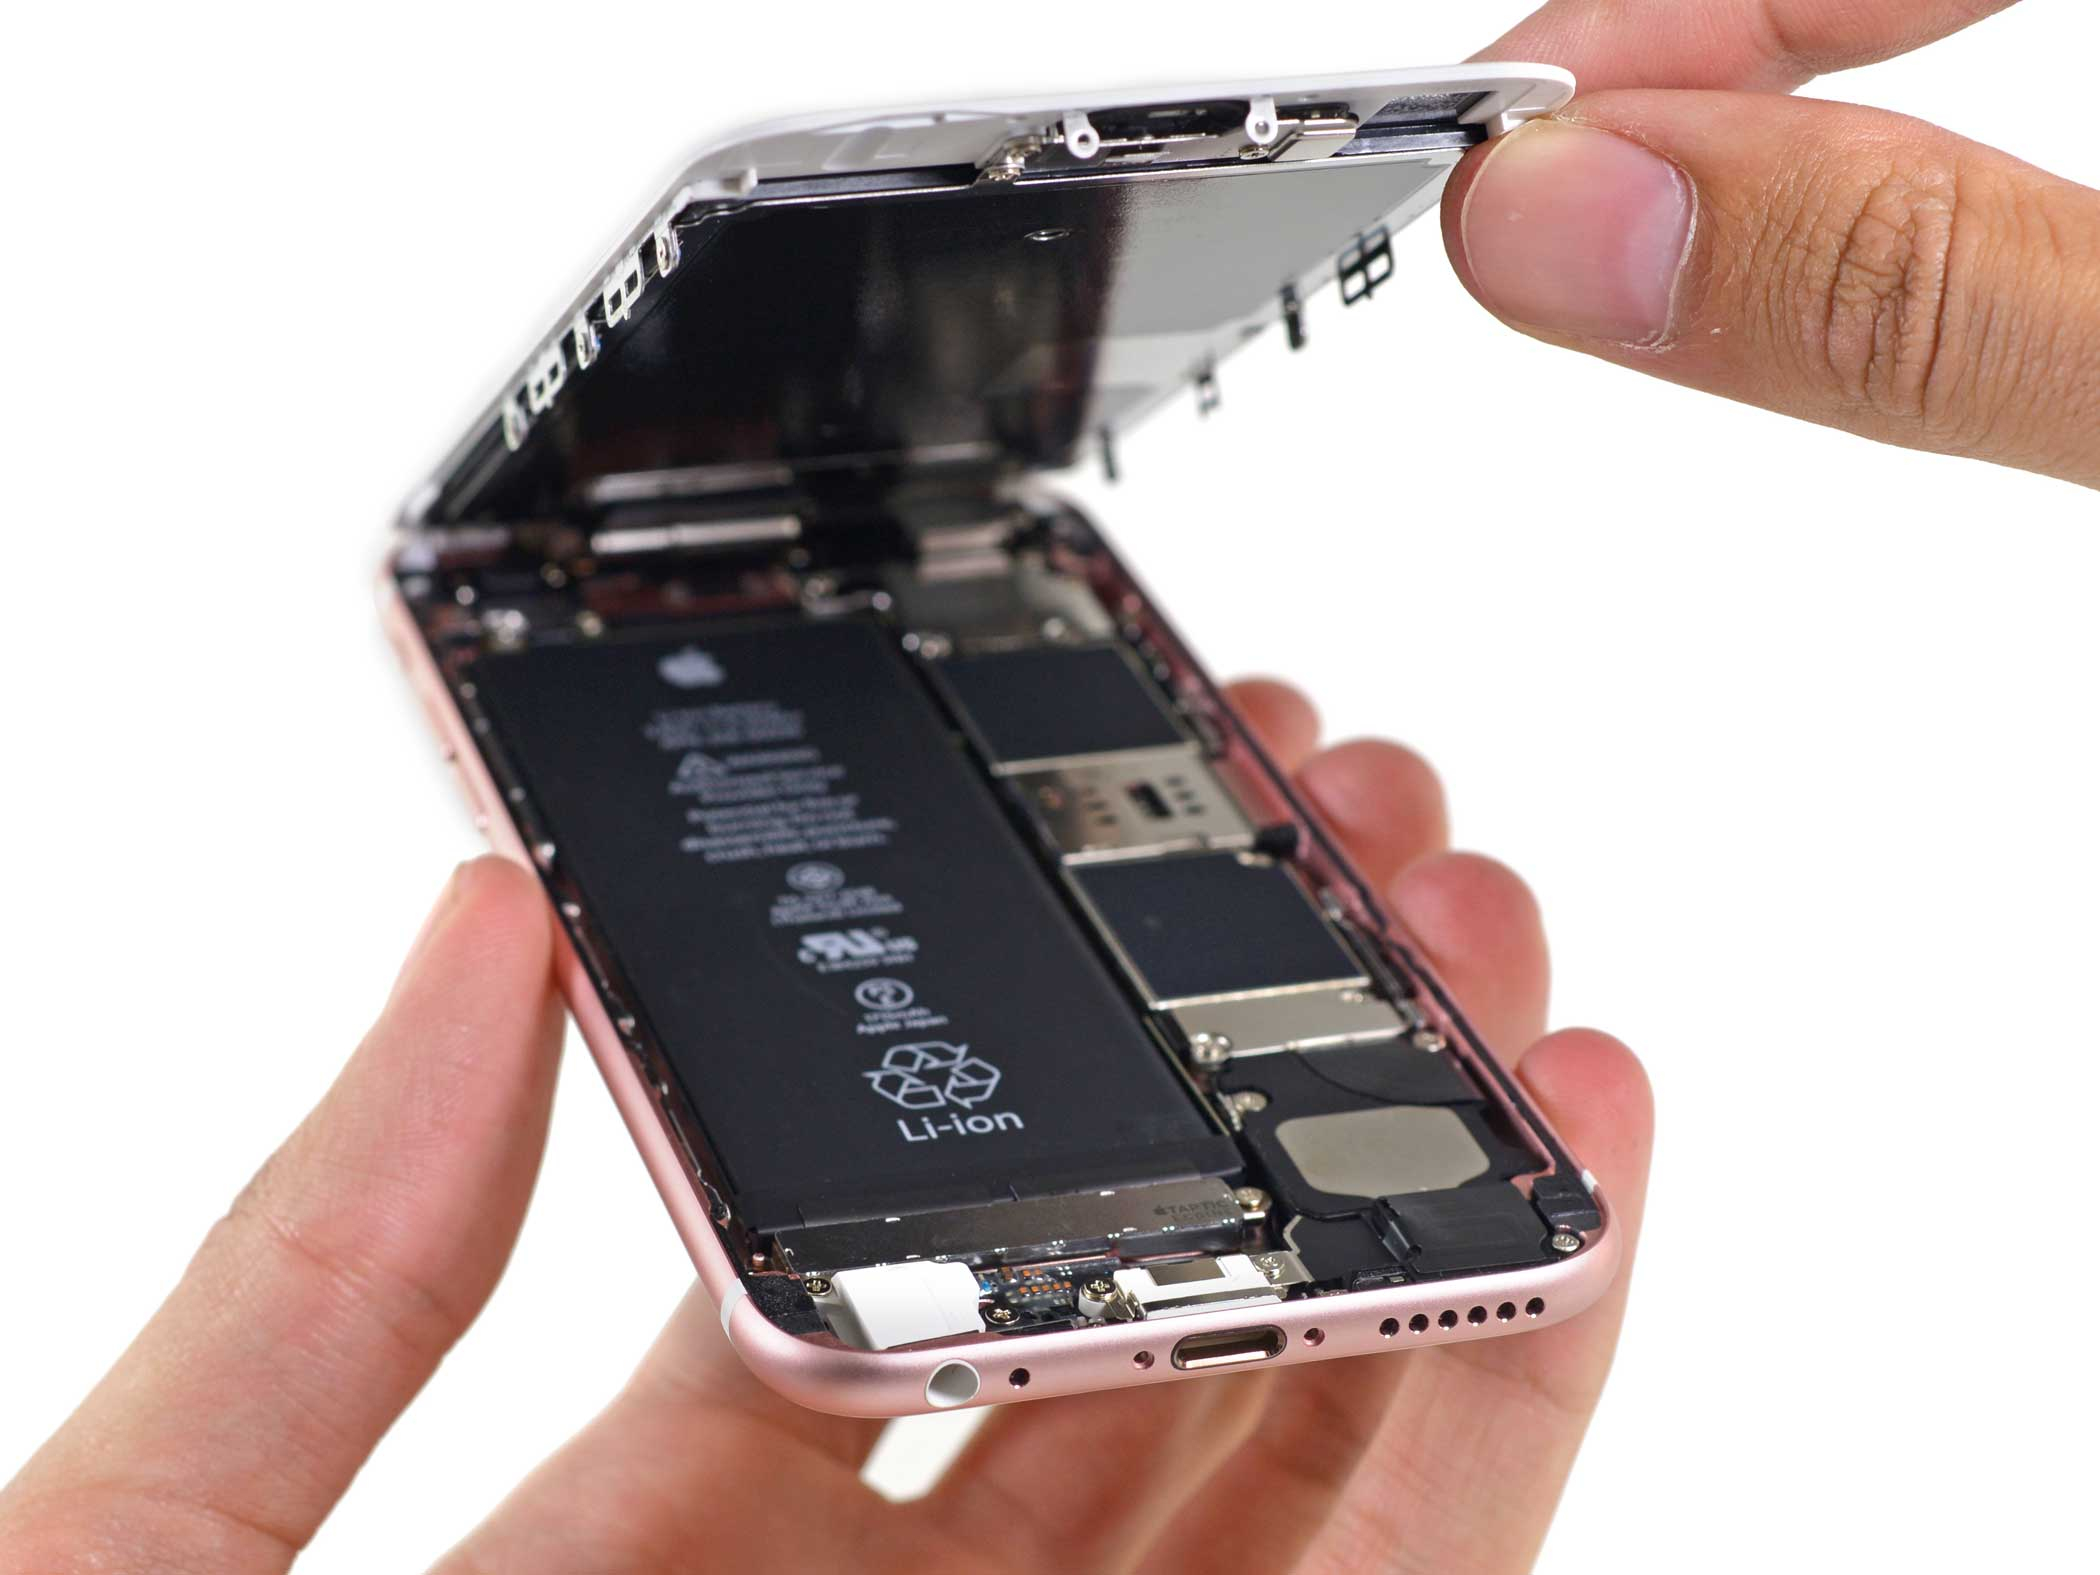 The innards of the iPhone 6s revealed.